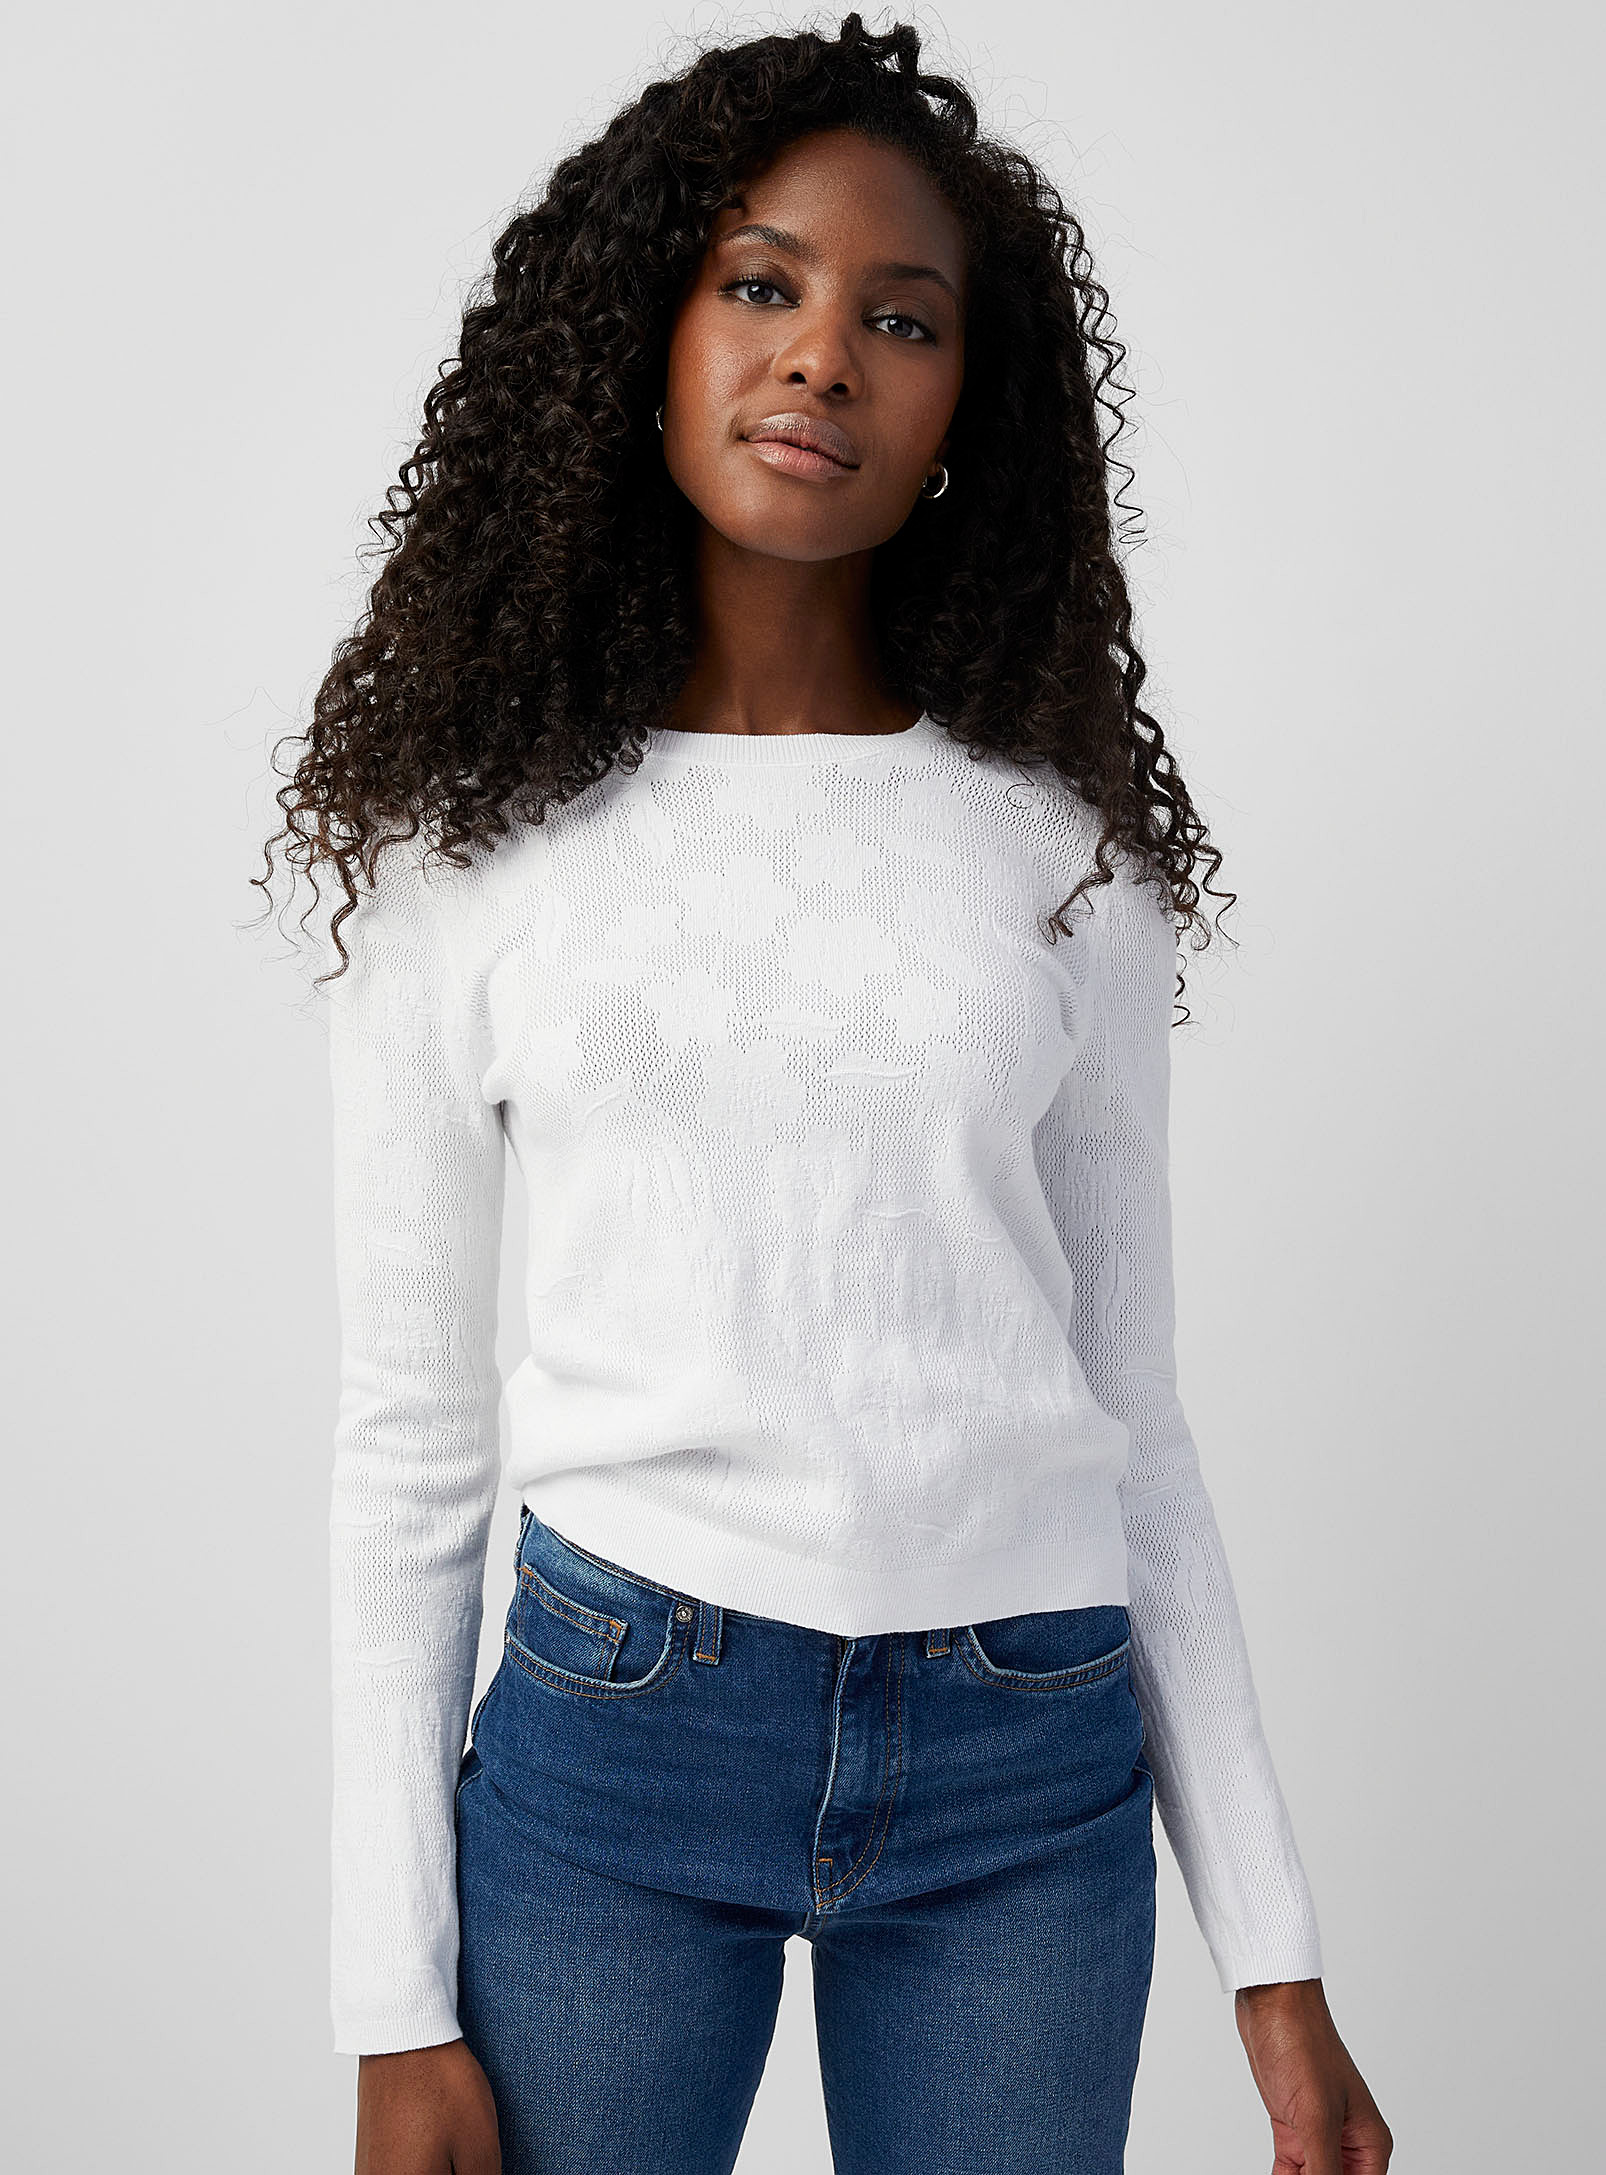 Contemporaine Flowers And Openwork Sweater In White